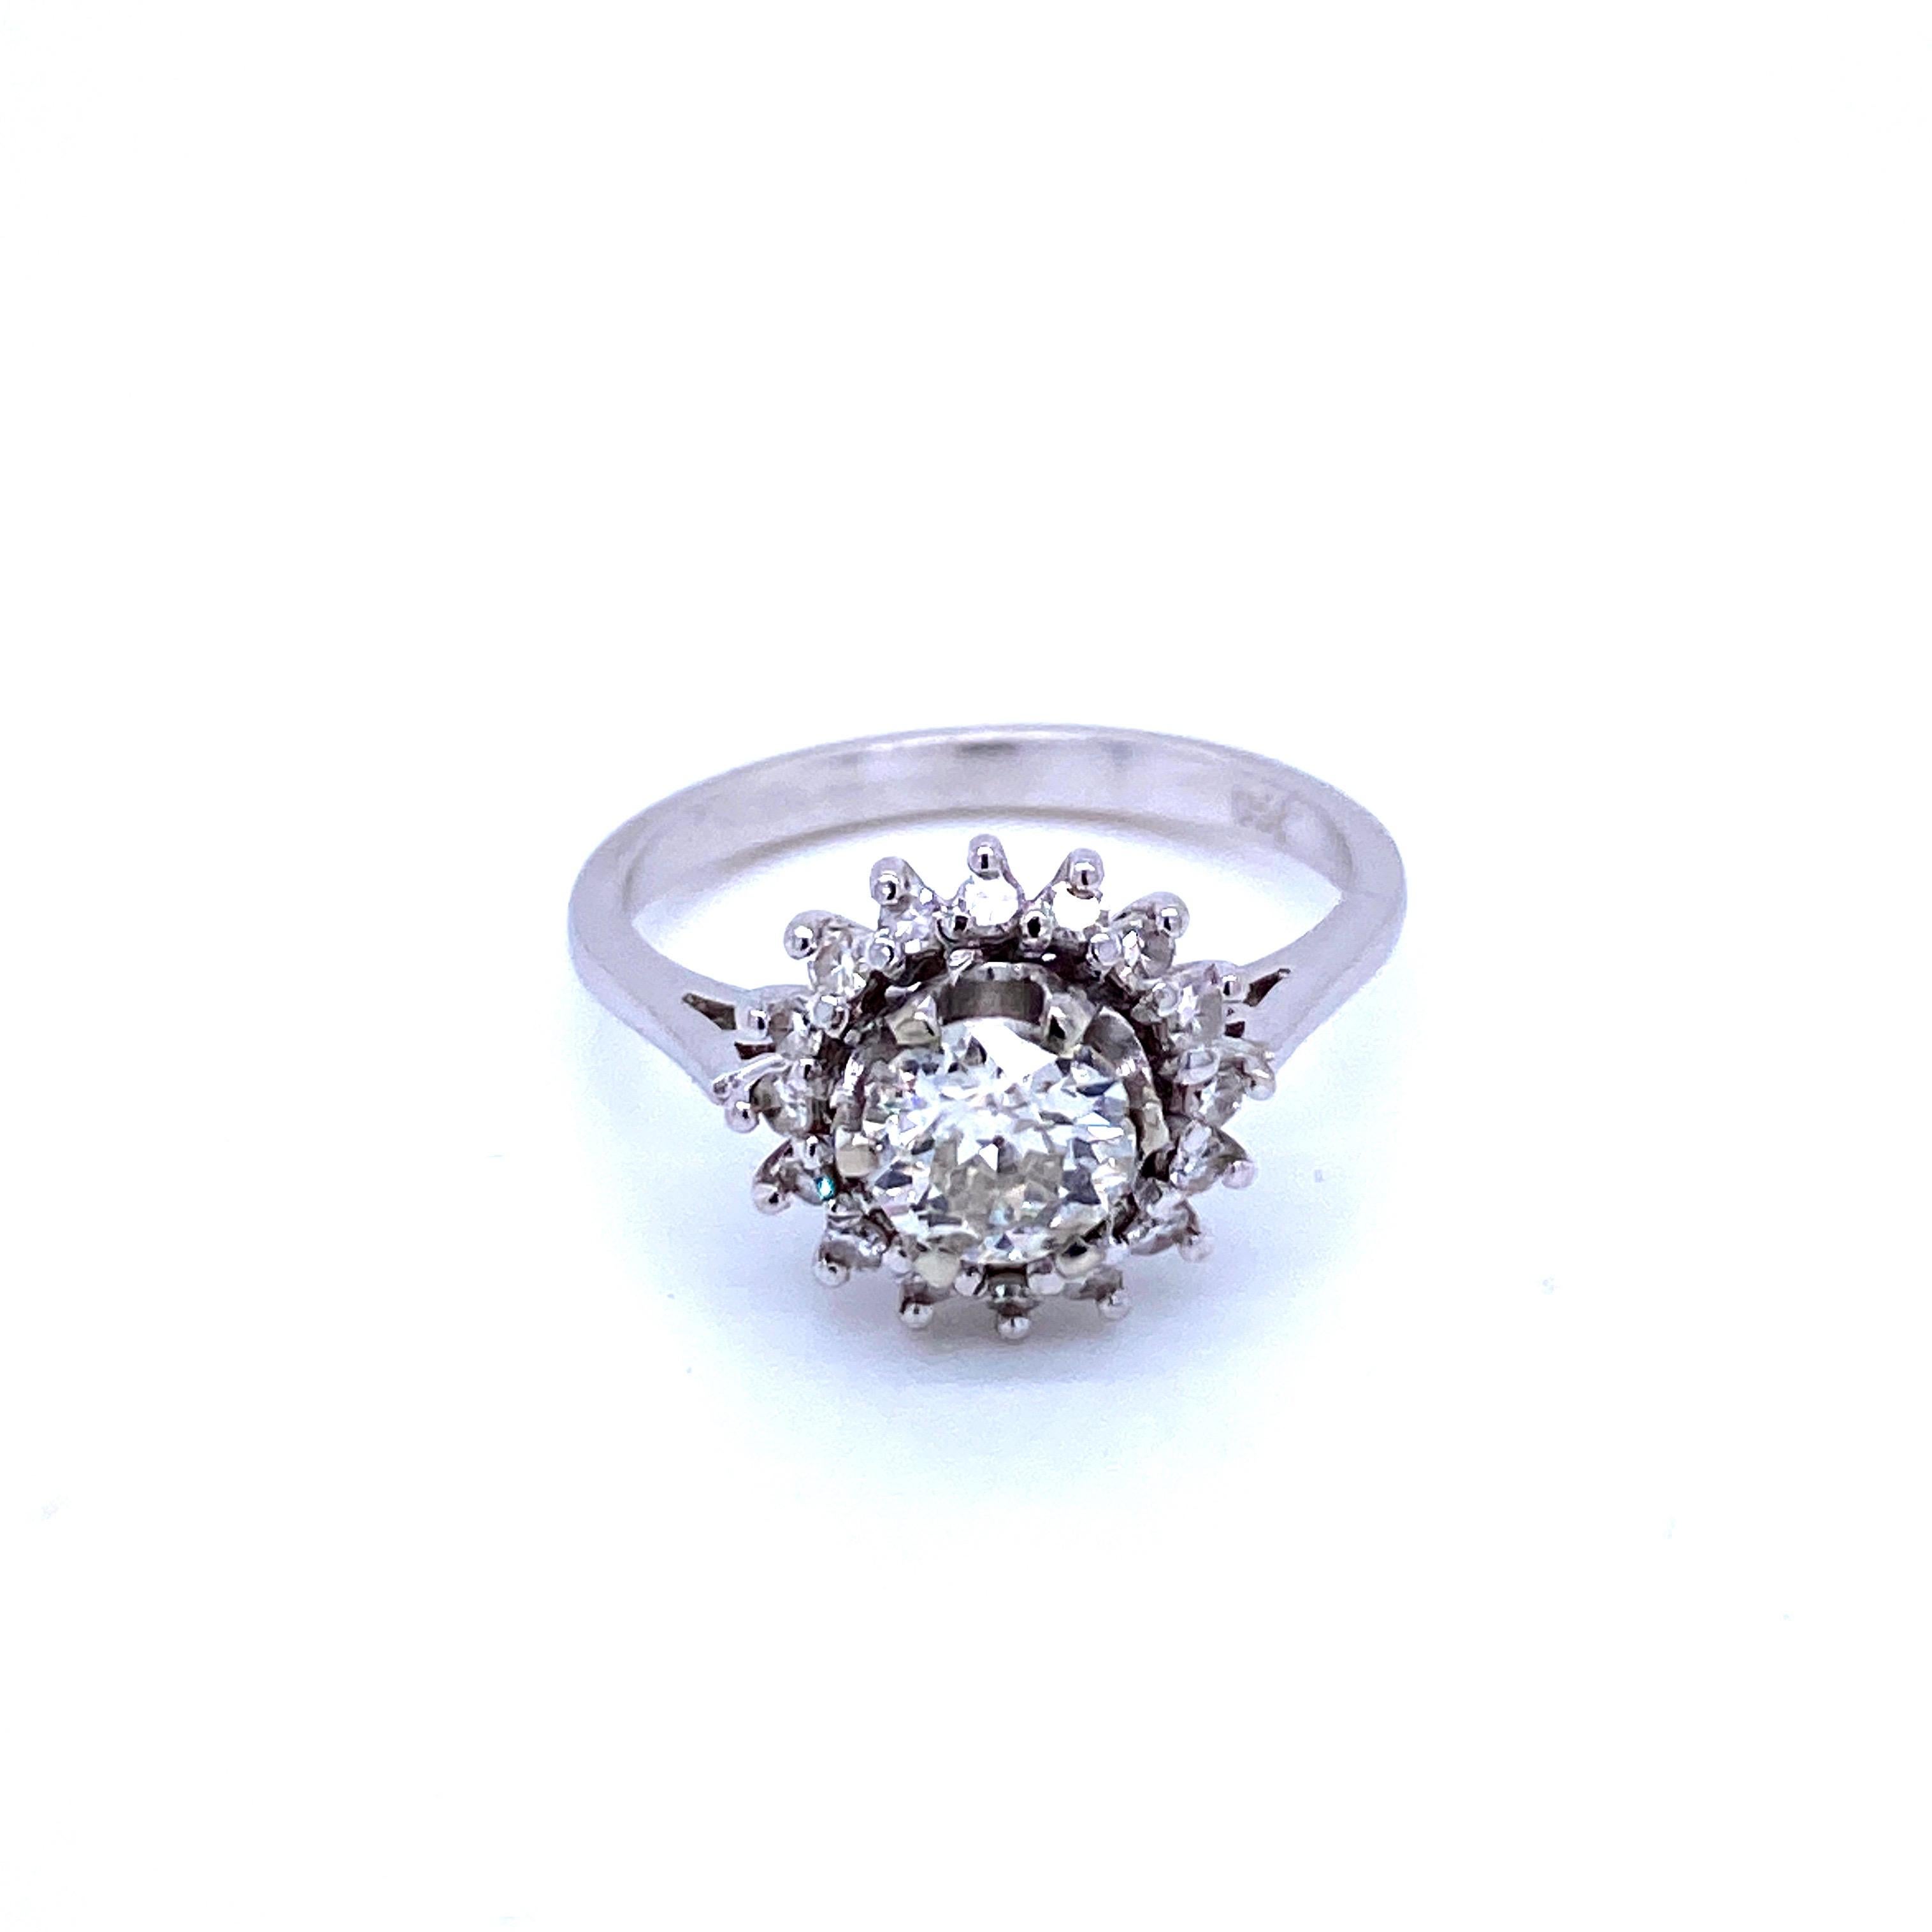 An exquisite example of Retro jewel, simple and elegant.

This ring is hand-crafted in 18k white gold, authentic from 1950', featuring in the center a large and sparkling Old mine-cut Diamond weighing approx. .90 carats, graded I color Vs2 clarity,